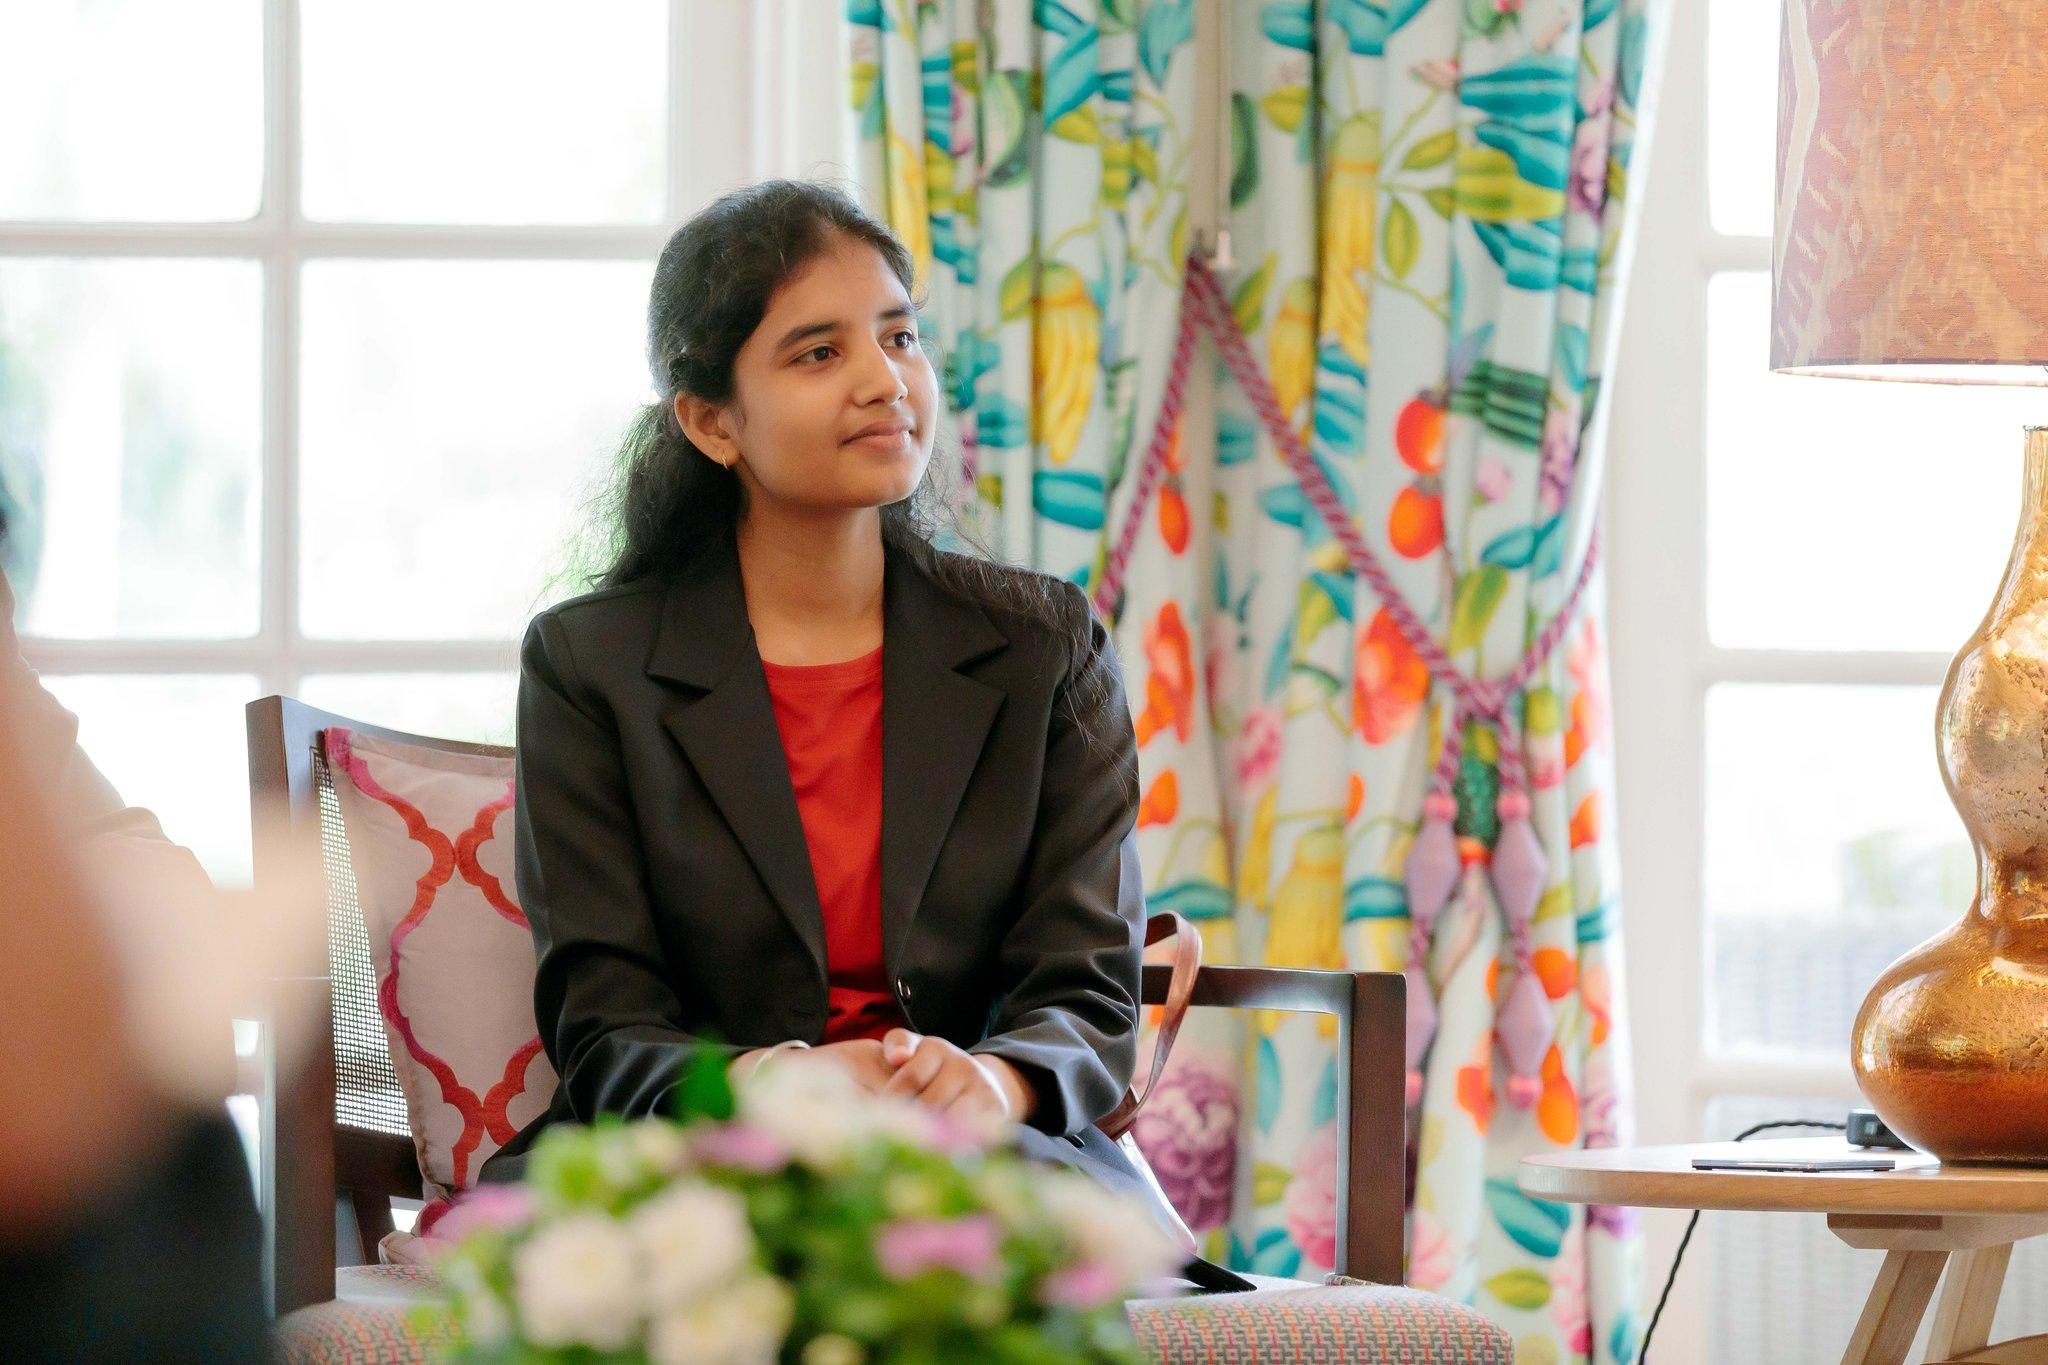 Who is Jagriti Yadav and how she became British high commissioner to India?